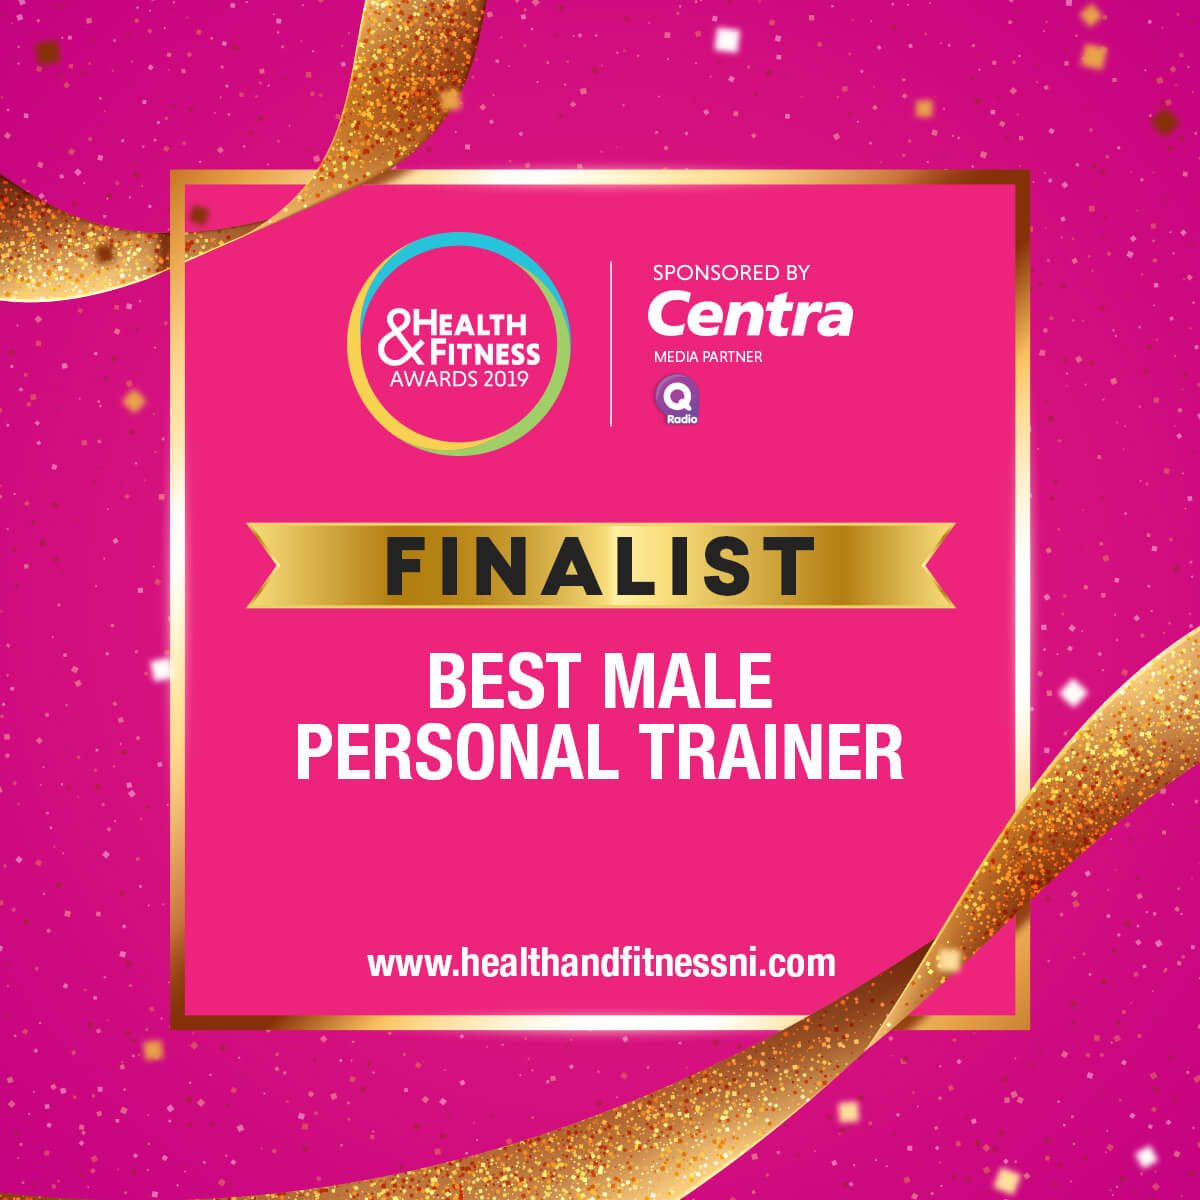 Fitness Belfast Finalist Northern Ireland Health and Fitness Awards 2019 Best Male Personal Trainer 2019.jpg